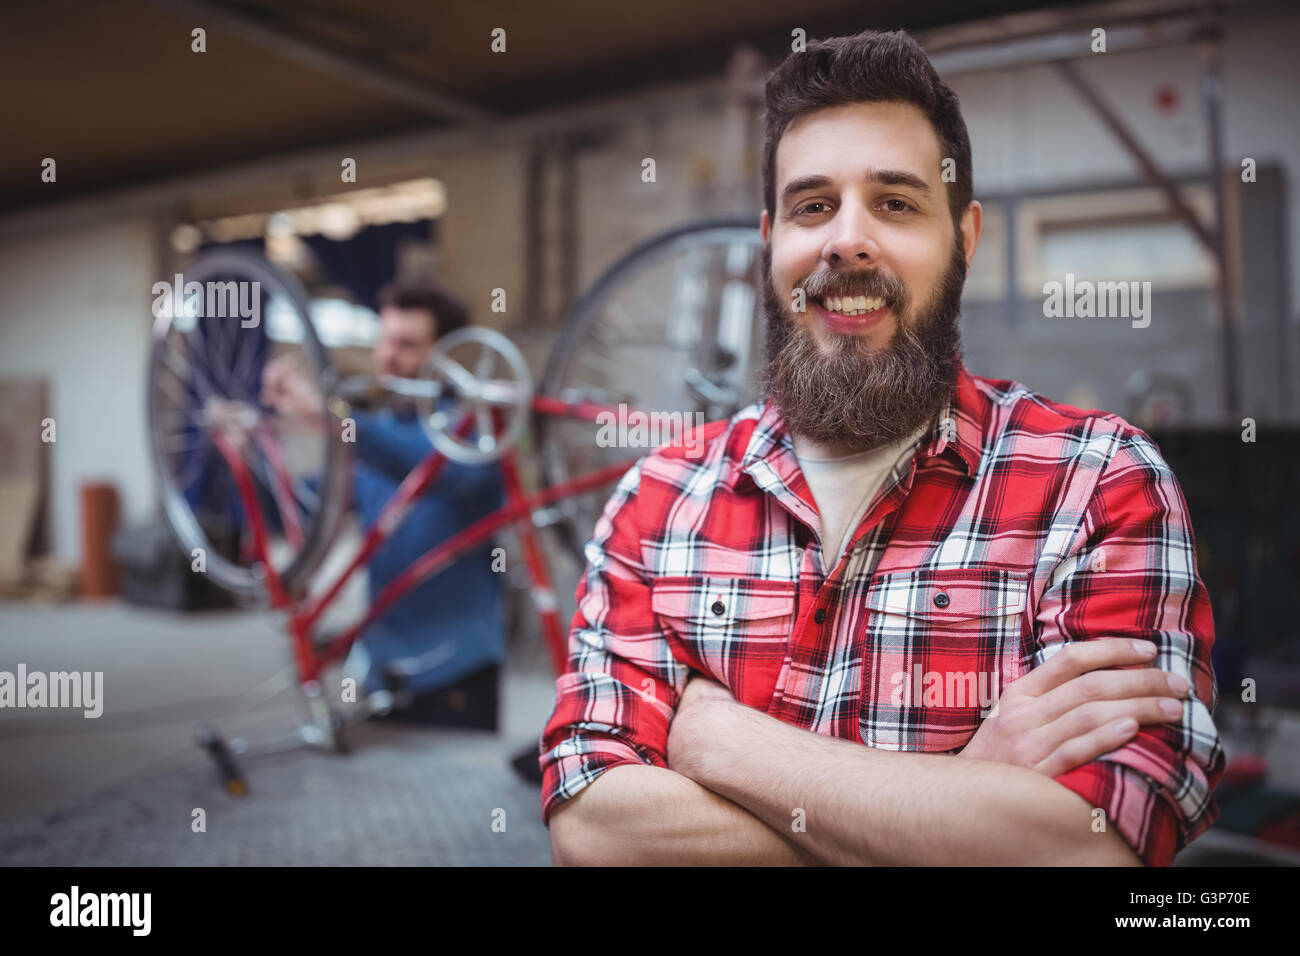 Portrait of mechanic smiling and posing Stock Photo